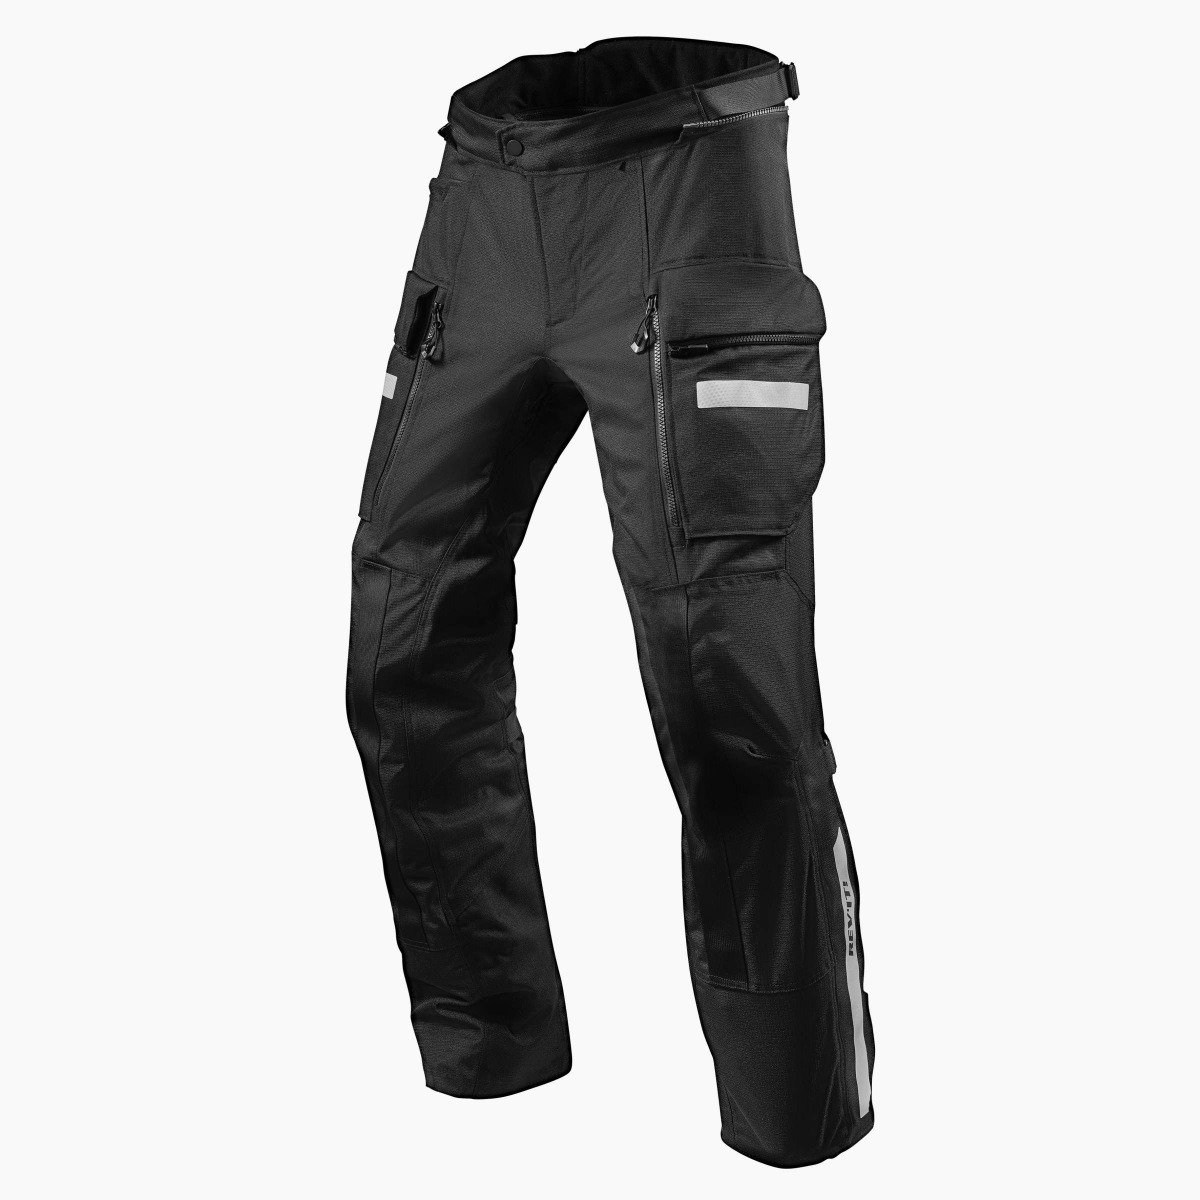 Image of REV'IT! Sand 4 H2O Short Black Motorcycle Pants Size 3XL ID 8700001316361